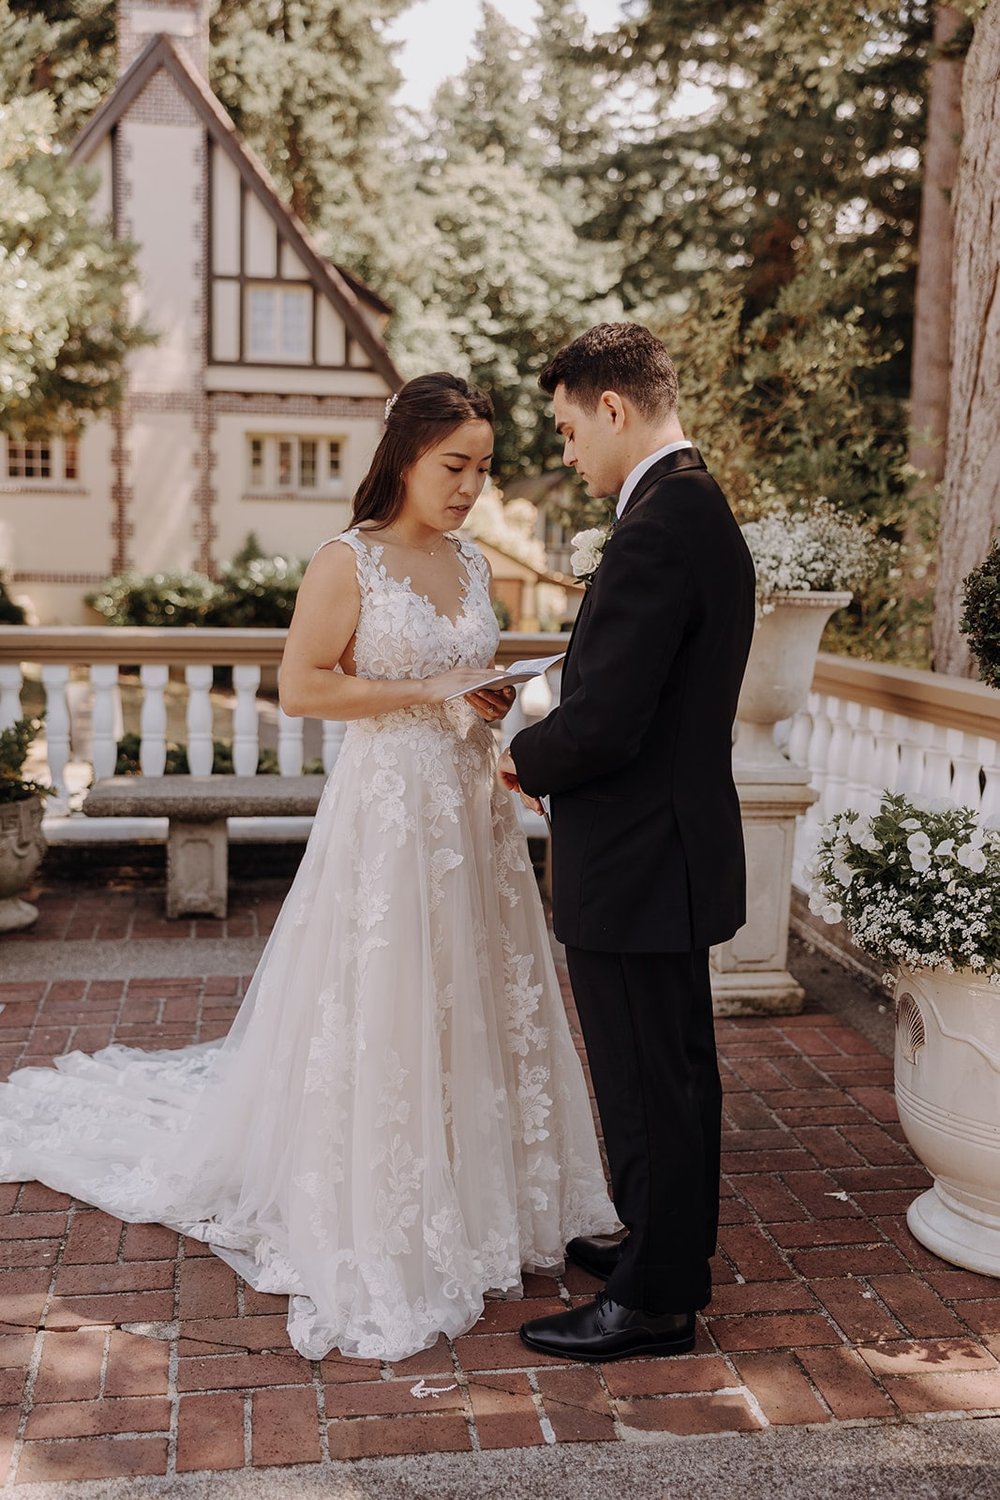 Bride and groom read personal vows at Lairmont Manor wedding in Washington